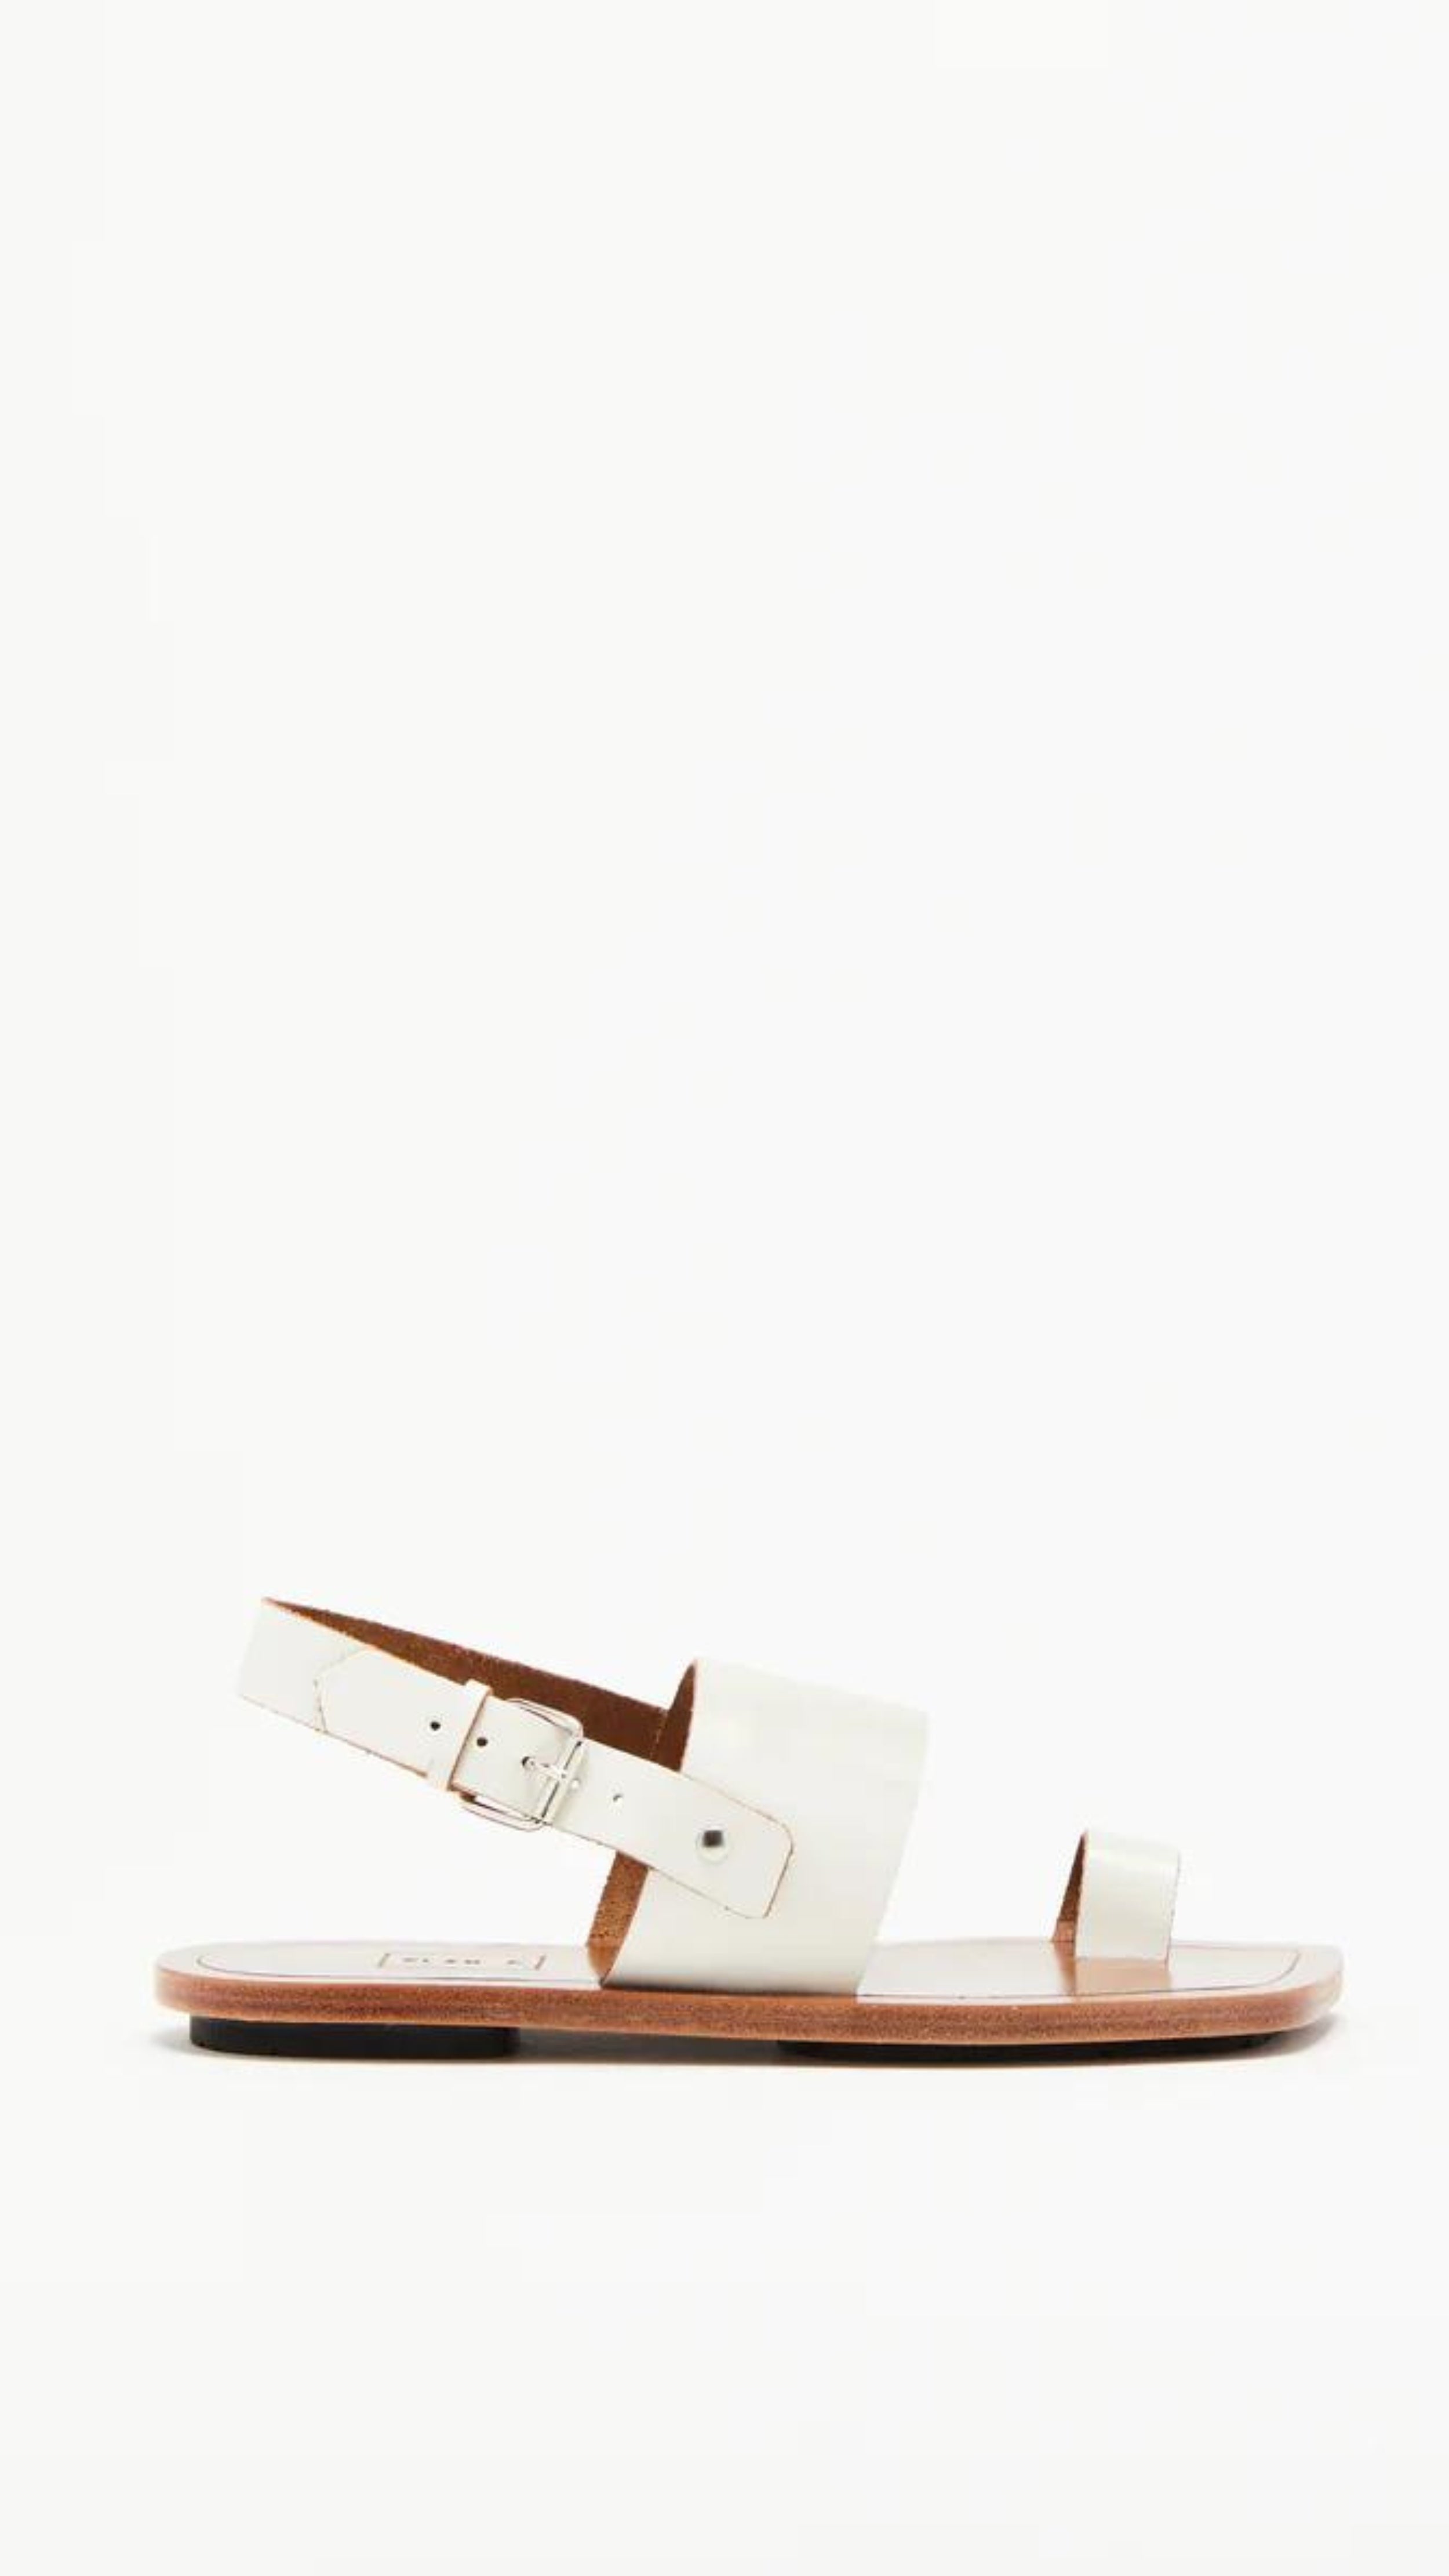 Plan C White Toe Ring Sandals. Made in Italy, these sandals have a strap across the foot, buckle around the heel and a ring of leather at the big toe. Flat sandals with a leather sole. Photo shown from the side.